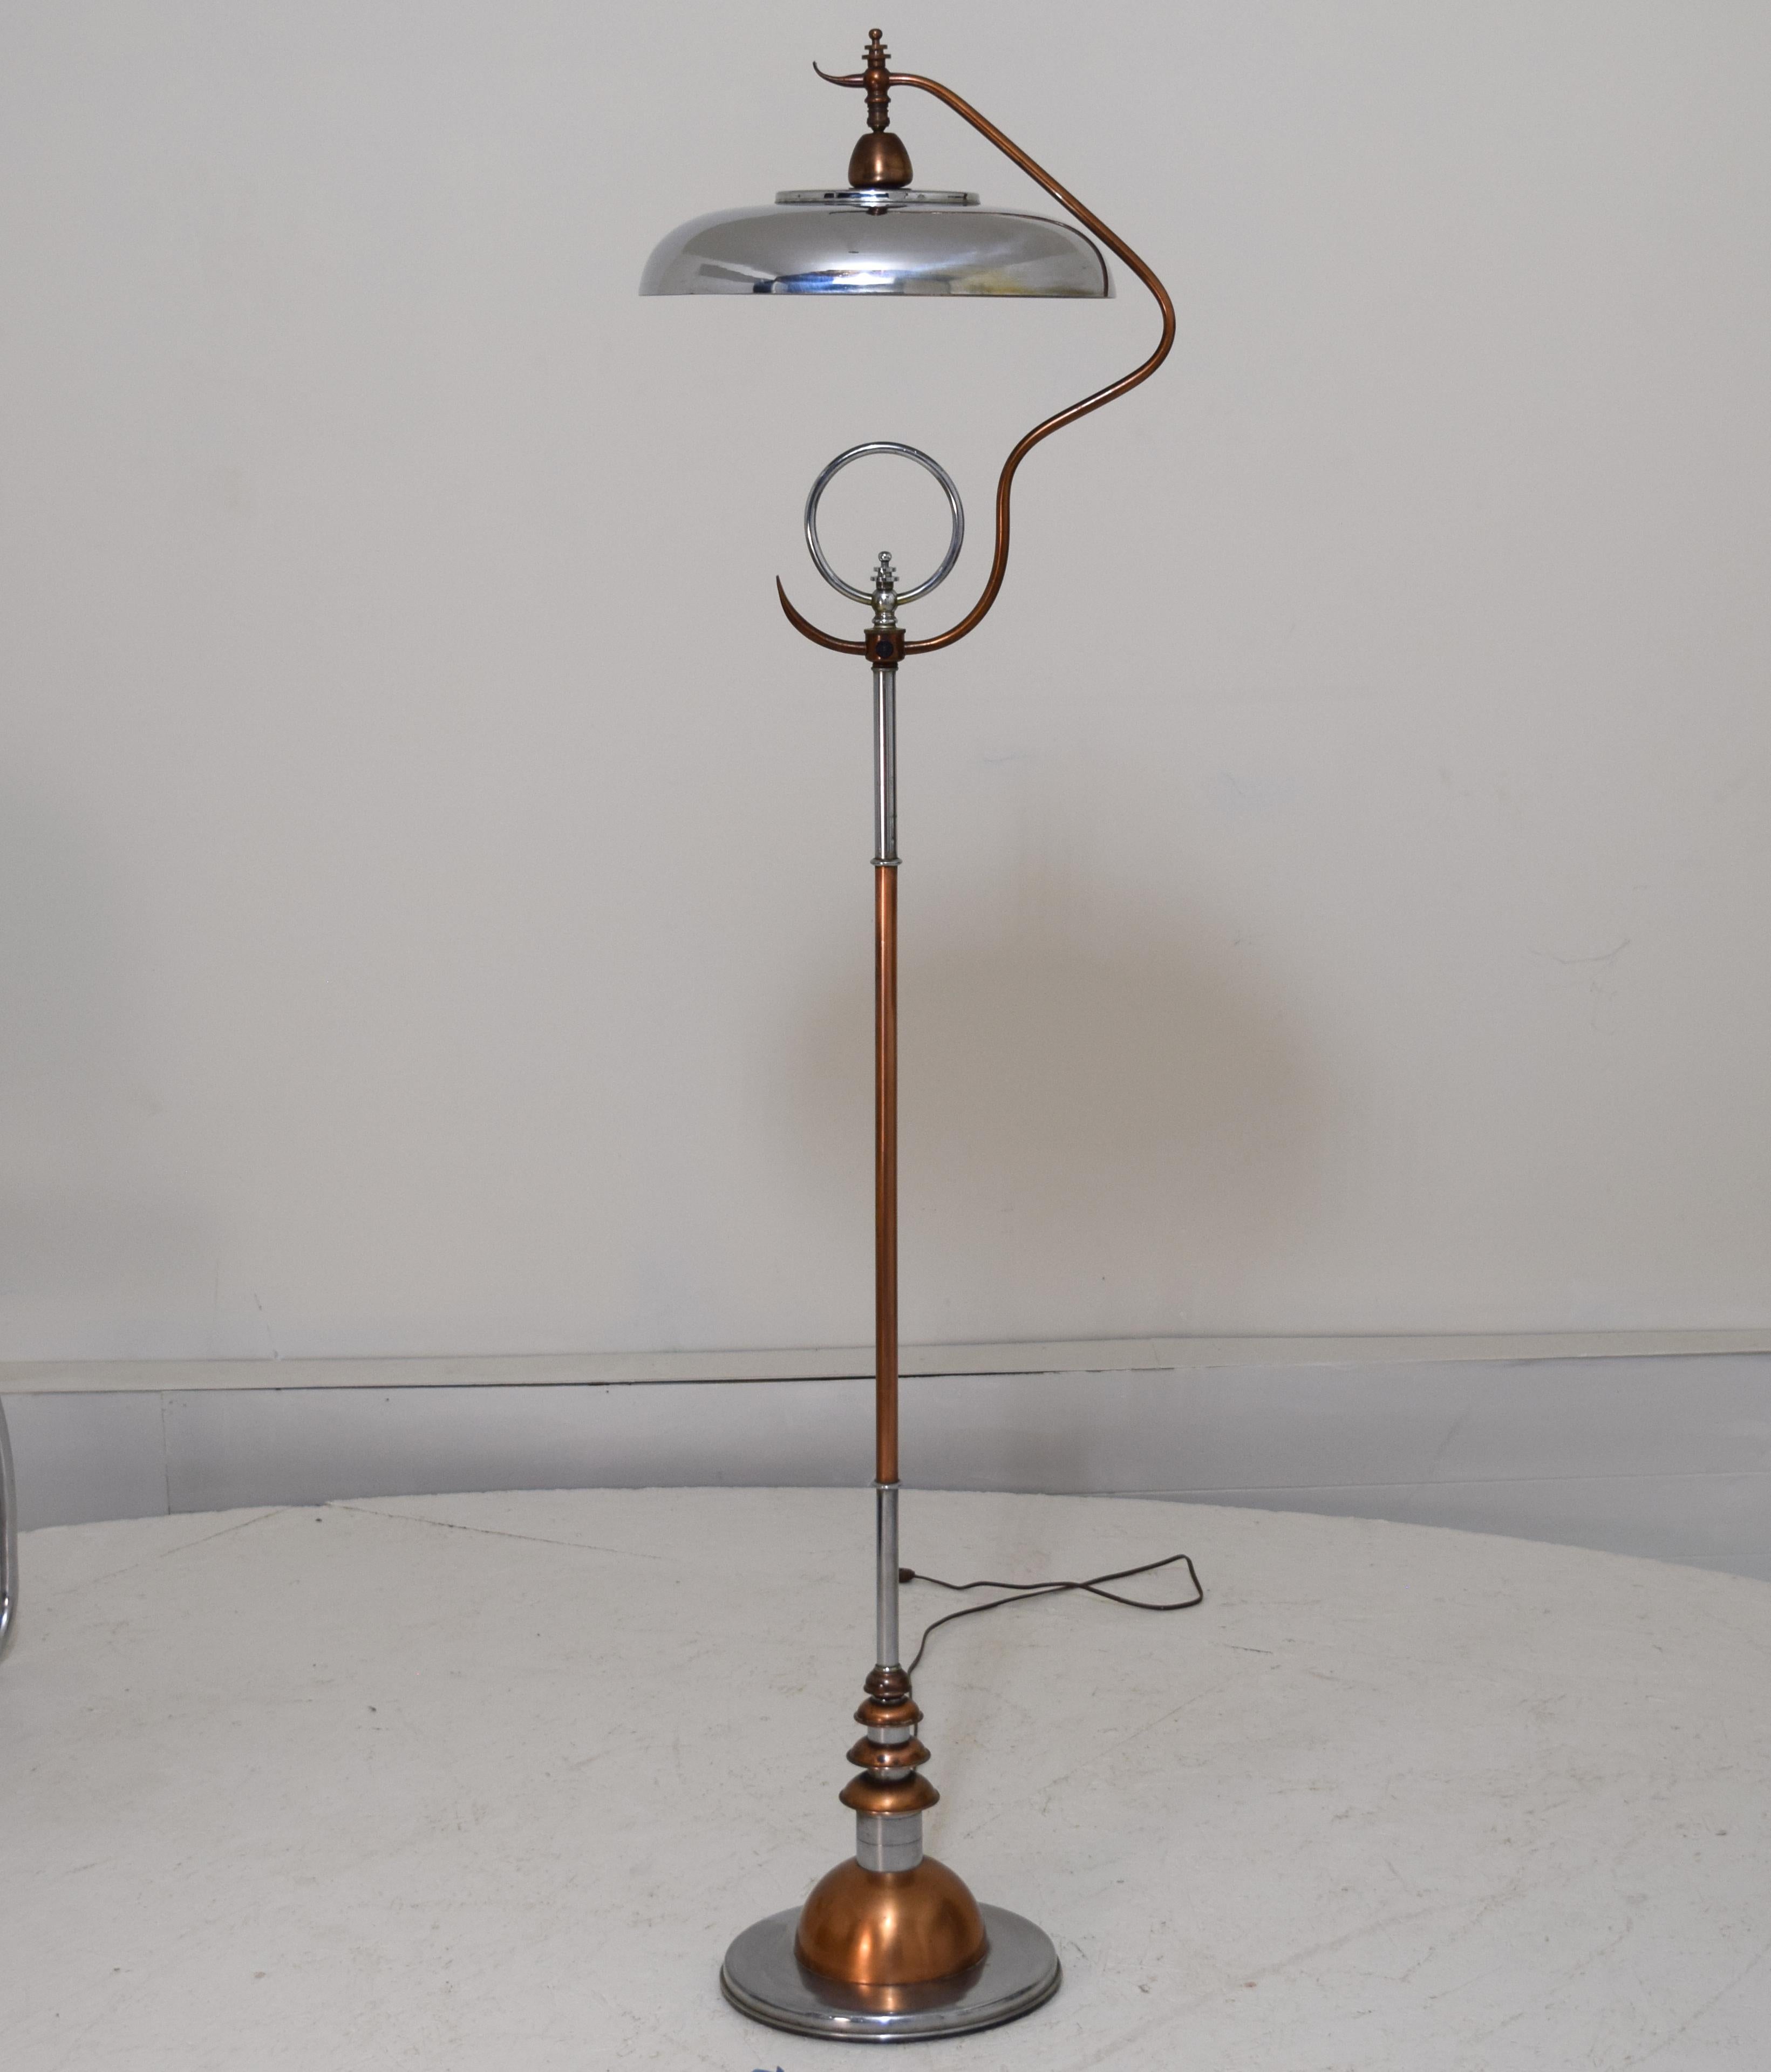 Floor lamp 1935. Copper, steel and chrome.
Measures: 59.5